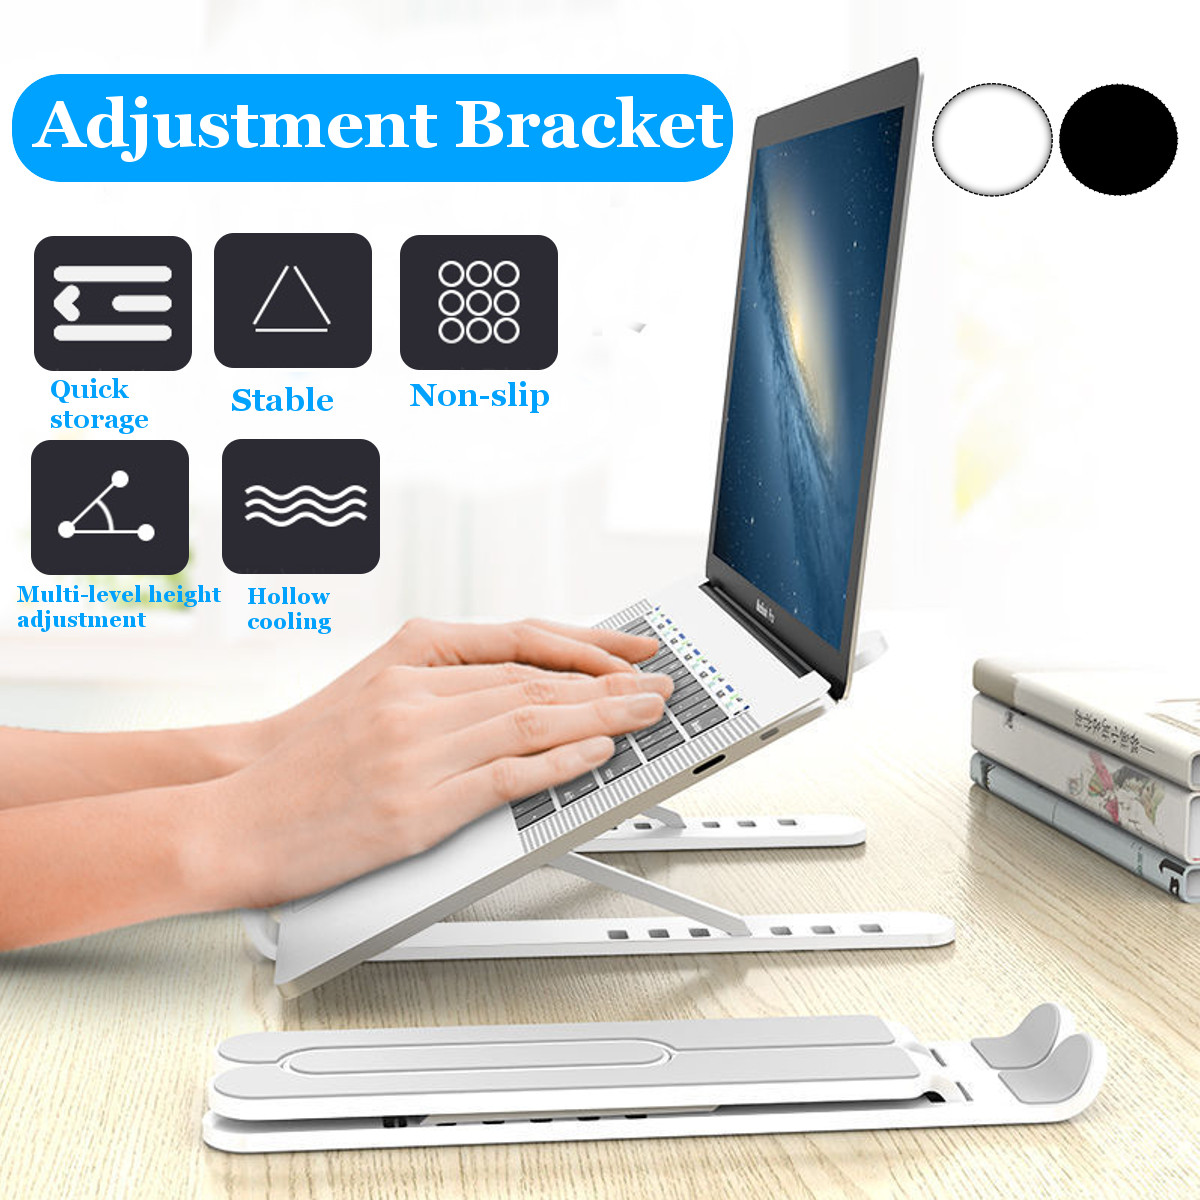 Bakeey-P1-Pro-Portable-Aluminum-Foldable-Height-Adjustable-Stand-Heat-Dissipation-For-Macbook-Laptop-1678262-1